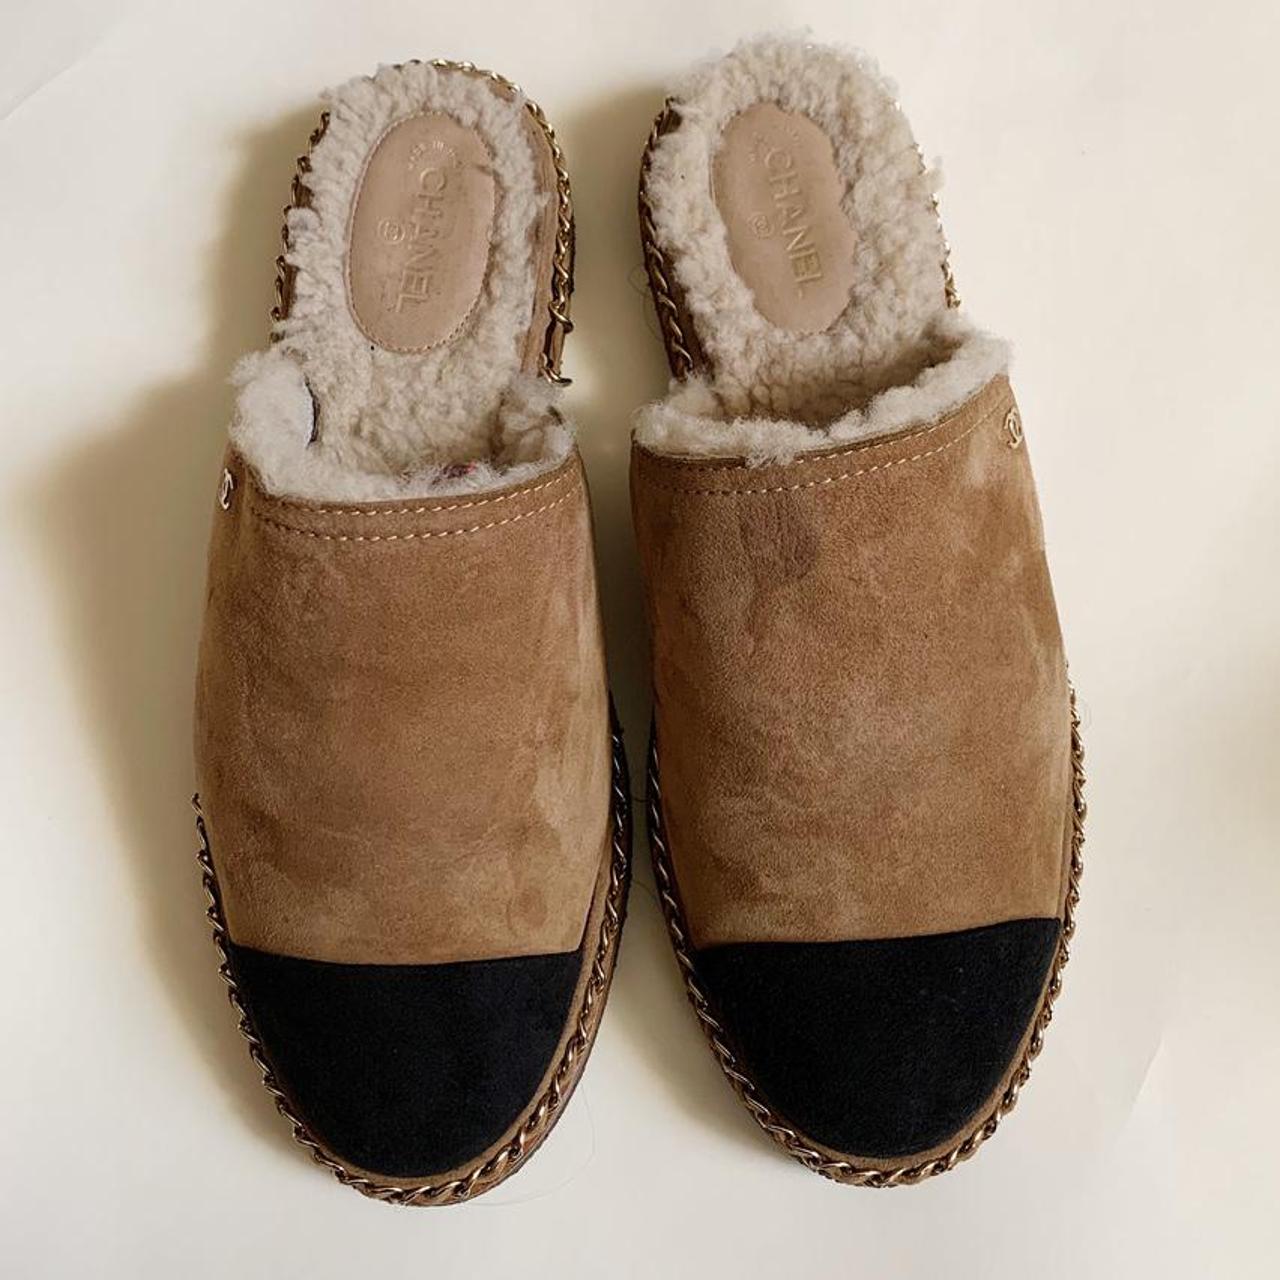 CHANEL, Shoes, Chanel Shearling Mules